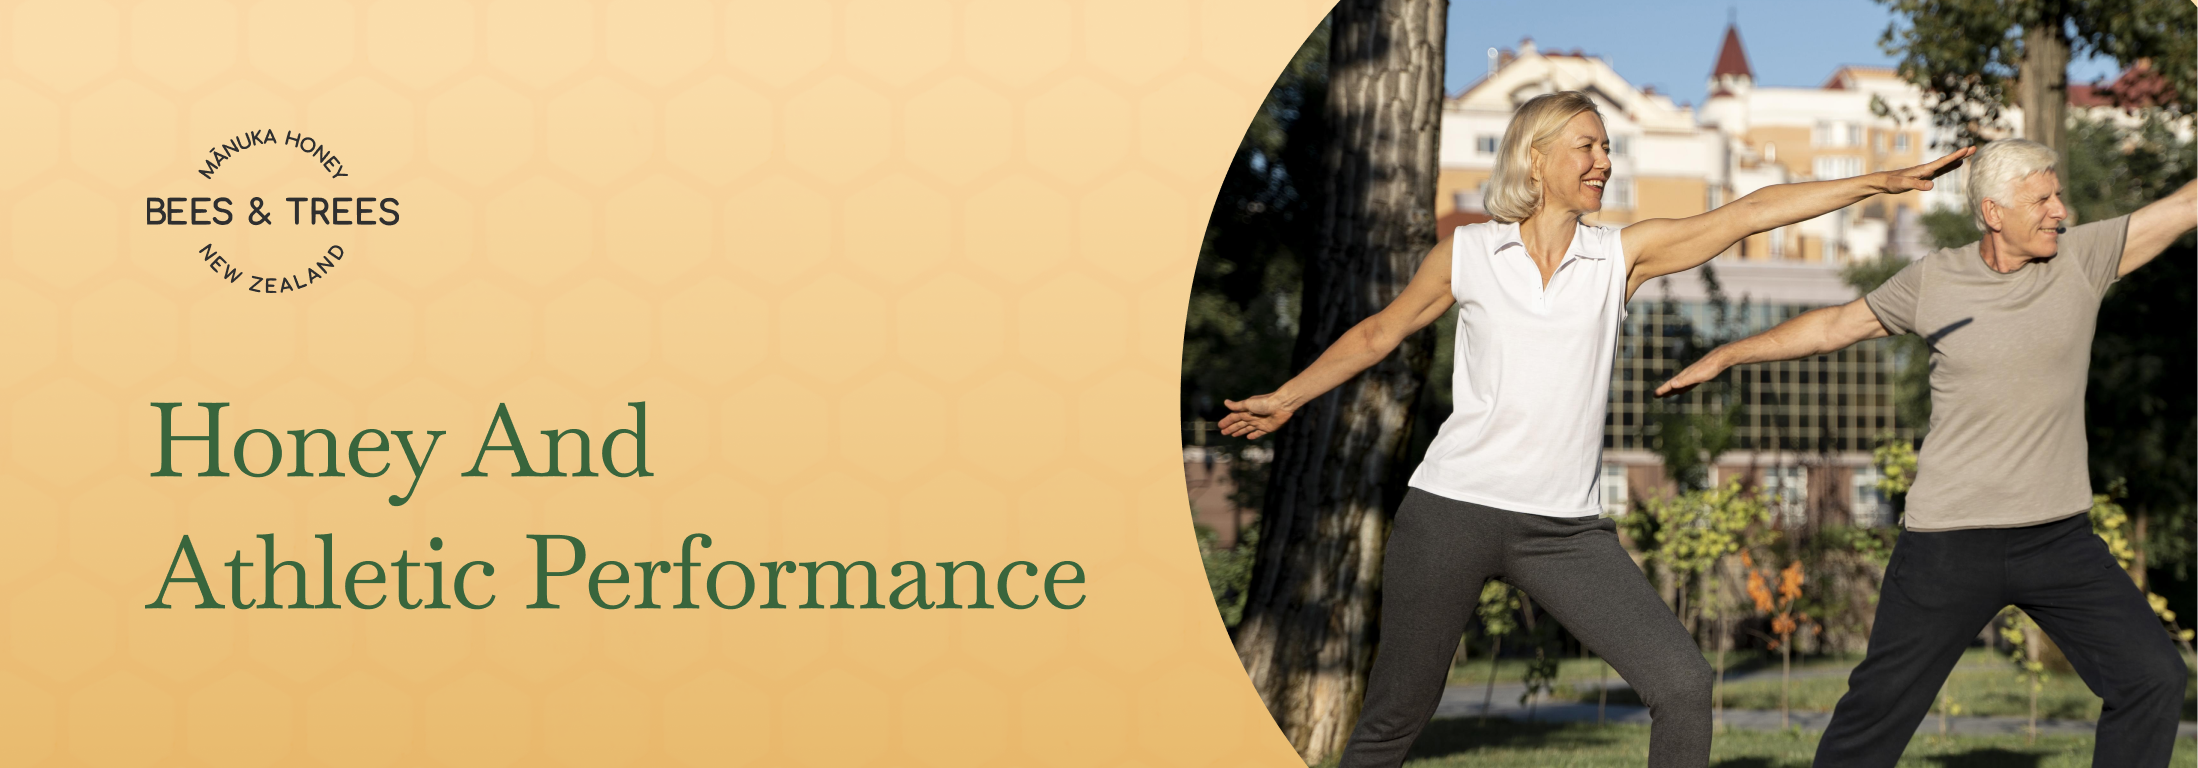 Honey and Athletic Performance